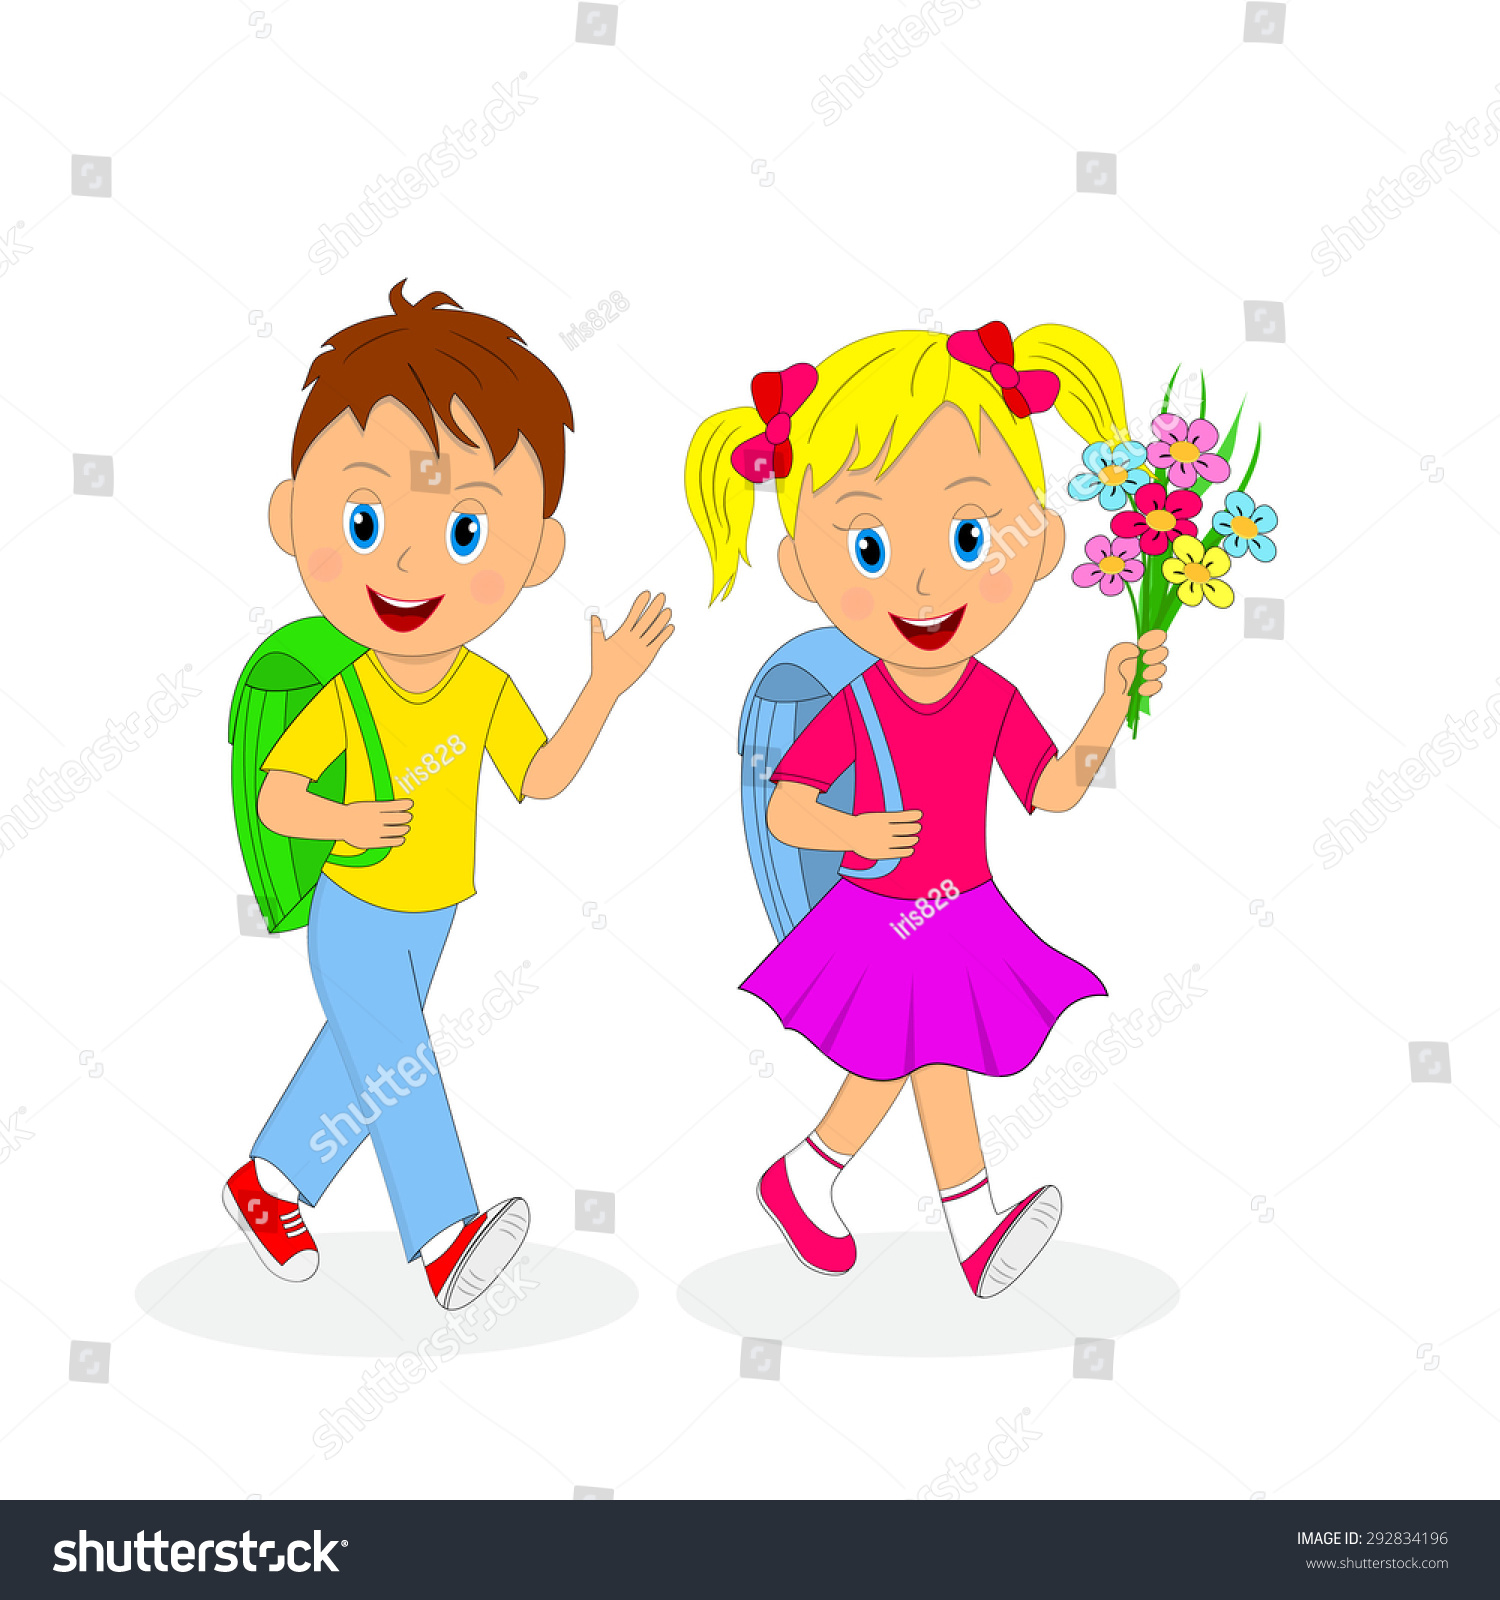 Back To School. Children Going To School. Girl With Flowers, The Boy ...